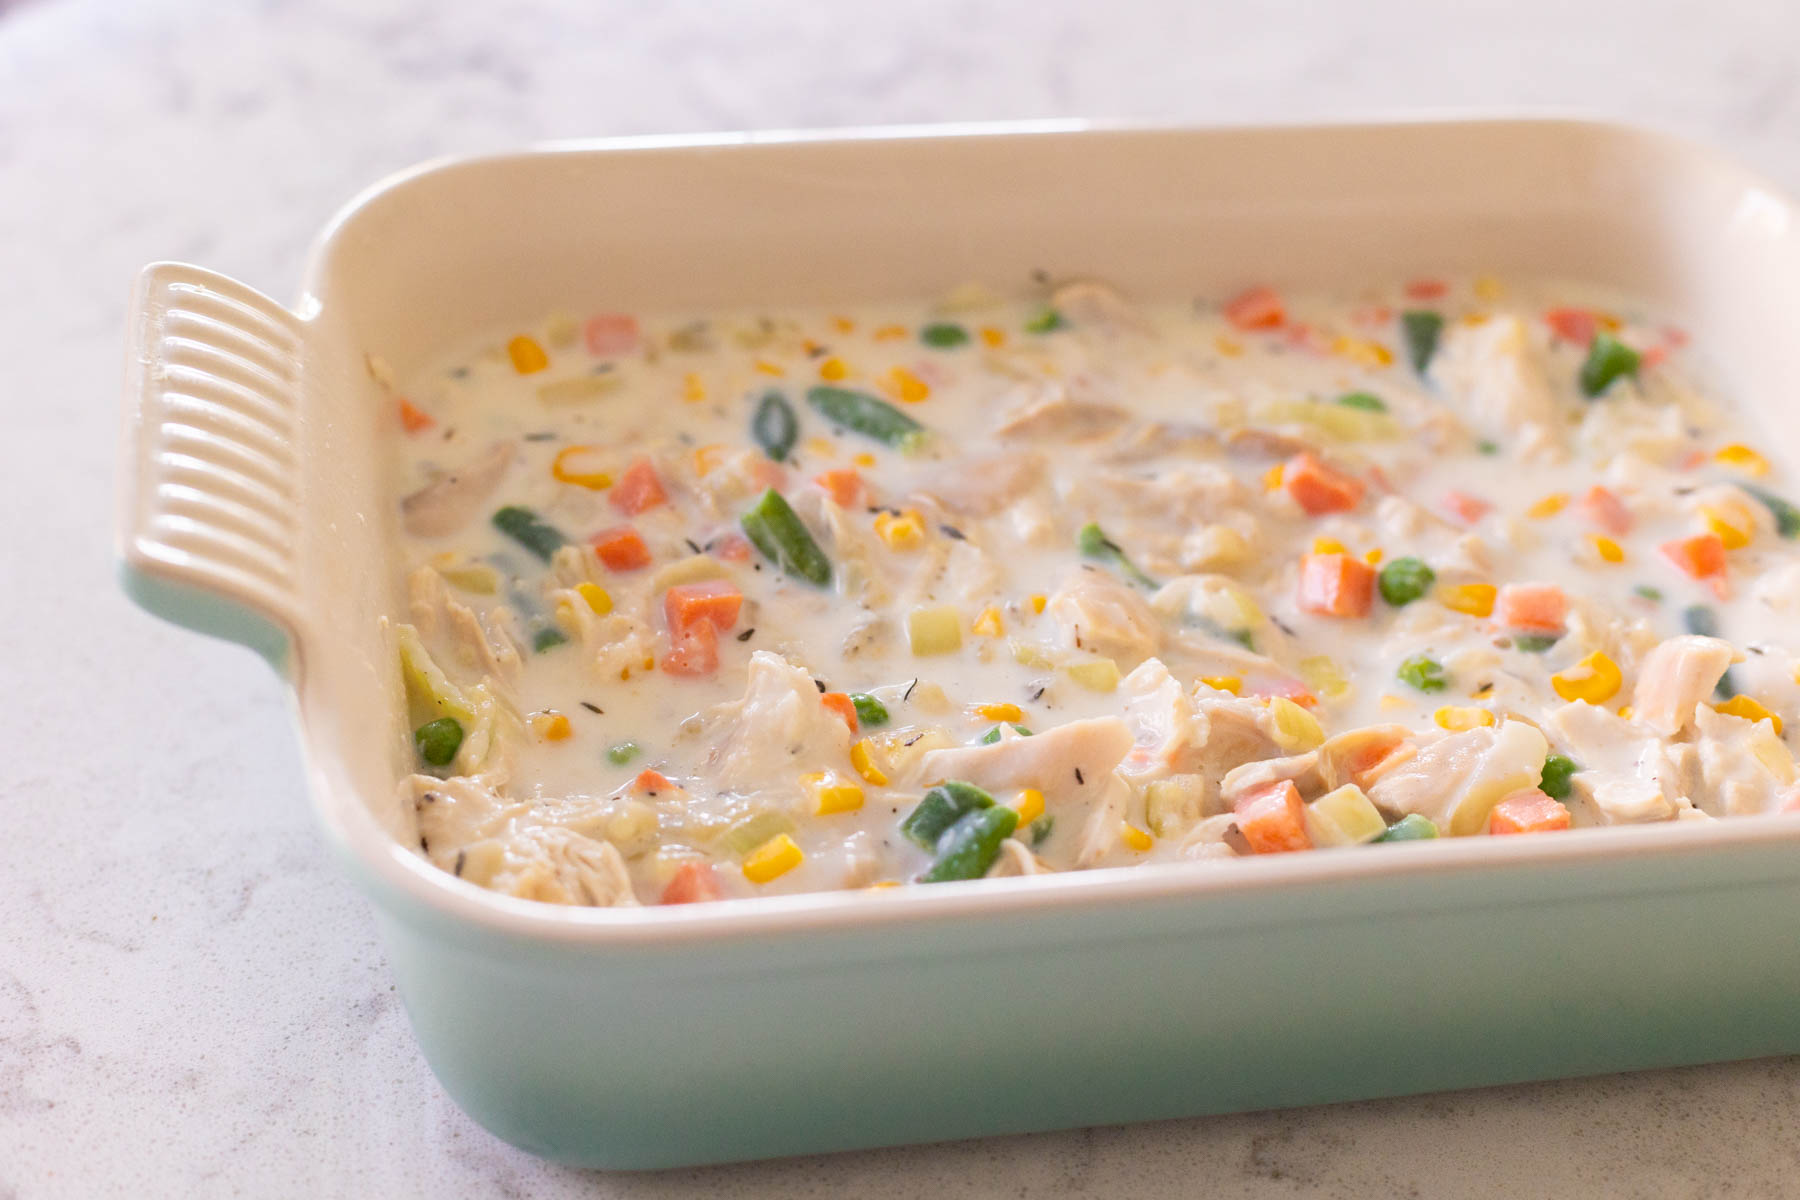 The baking dish is filled with the chicken pot pie filling.